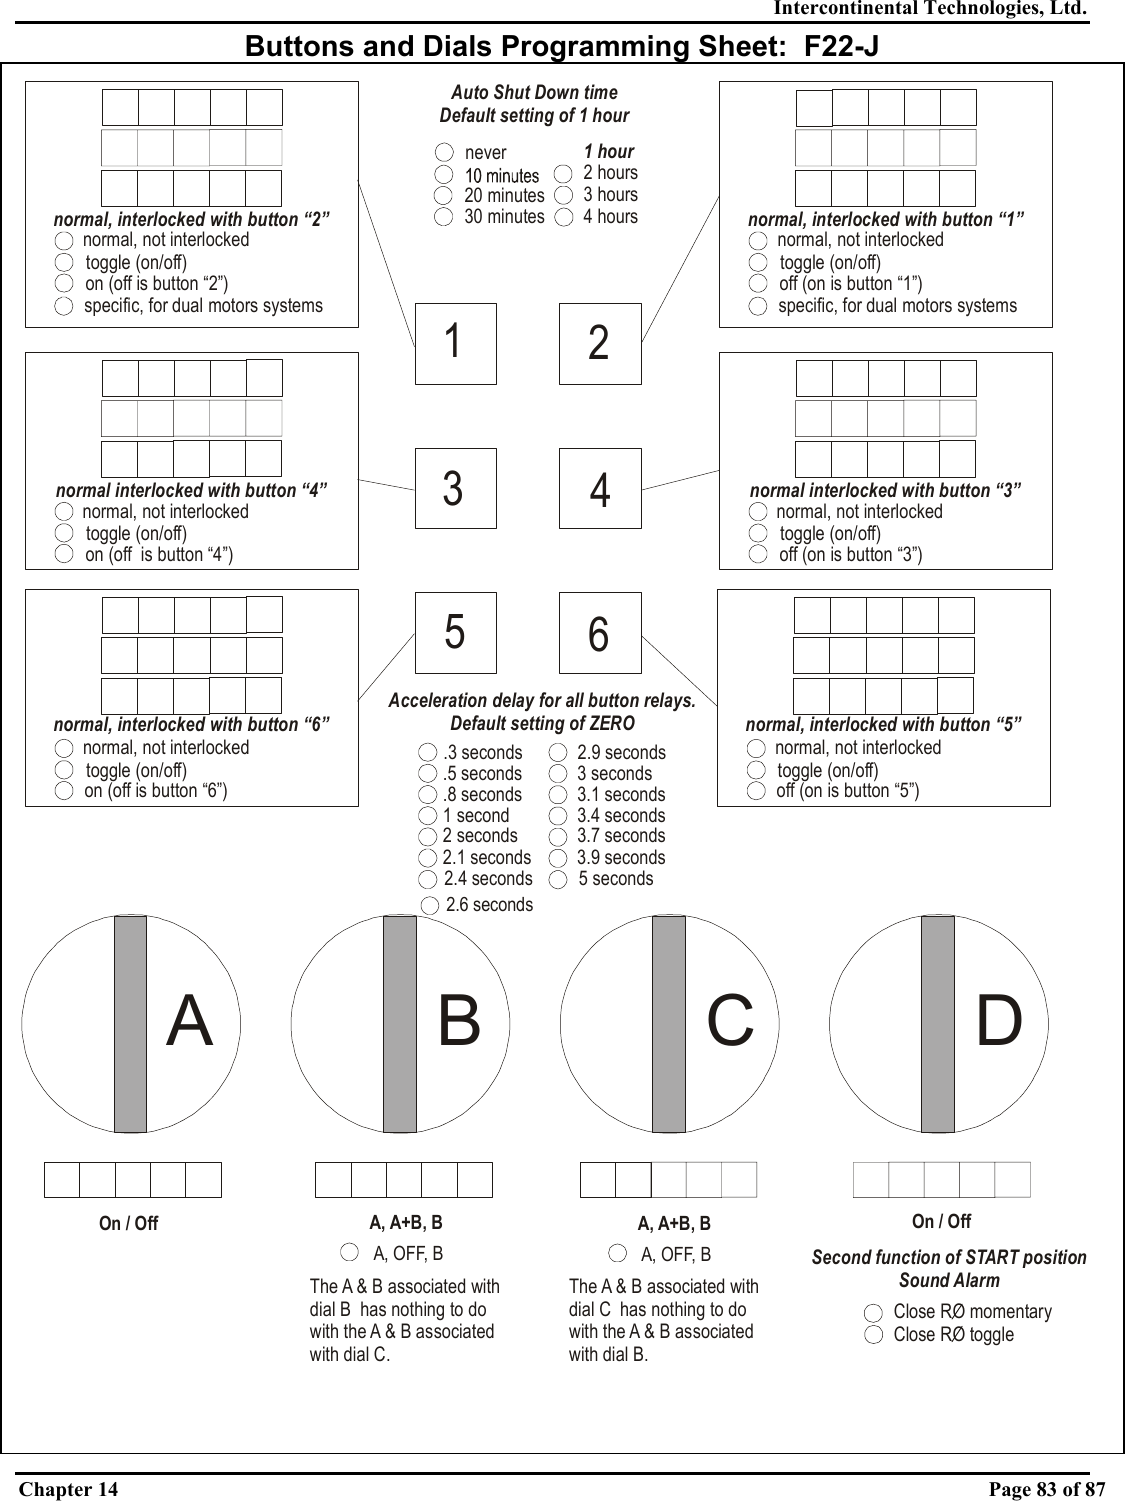 Intercontinental Technologies, Ltd. Chapter 14    Page 83 of 87  Buttons and Dials Programming Sheet:  F22-J normal interlocked with button “3”normal interlocked with button “4”normal, not interlockednormal, not interlockedtoggle (on/off)toggle (on/off)off (on is button “1”)on (off is button “2”)normal, interlocked with button “1”normal, interlocked with button “2”normal, not interlockednormal, not interlockedtoggle (on/off)toggle (on/off)off (on is button “5”)on (off is button “6”)normal, interlocked with button “5”normal, interlocked with button “6”normal, not interlockednormal, not interlockedtoggle (on/off)toggle (on/off)off (on is button “3”)on (off  is button “4”)123456.3 seconds 2.9 seconds.5 seconds 3 seconds.8 seconds 3.1 seconds1 second 3.4 seconds2 seconds 3.7 seconds2.4 seconds 5 seconds2.1 seconds 3.9 seconds2.6 secondsAcceleration delay for all button relays.Default setting of ZEROspecific, for dual motors systemsspecific, for dual motors systemsA B C DOn / Off On / OffA, A+B, BA, A+B, BA, OFF, BA, OFF, BThe A &amp; B associated with dial B  has nothing to do with the A &amp; B associated with dial C. The A &amp; B associated with dial C  has nothing to do with the A &amp; B associated with dial B. 20 minutes30 minutesnever1 hour2 hours3 hours4 hoursAuto Shut Down timeDefault setting of 1 hourSecond function of START positionSound AlarmClose RO momentaryClose RO toggle 